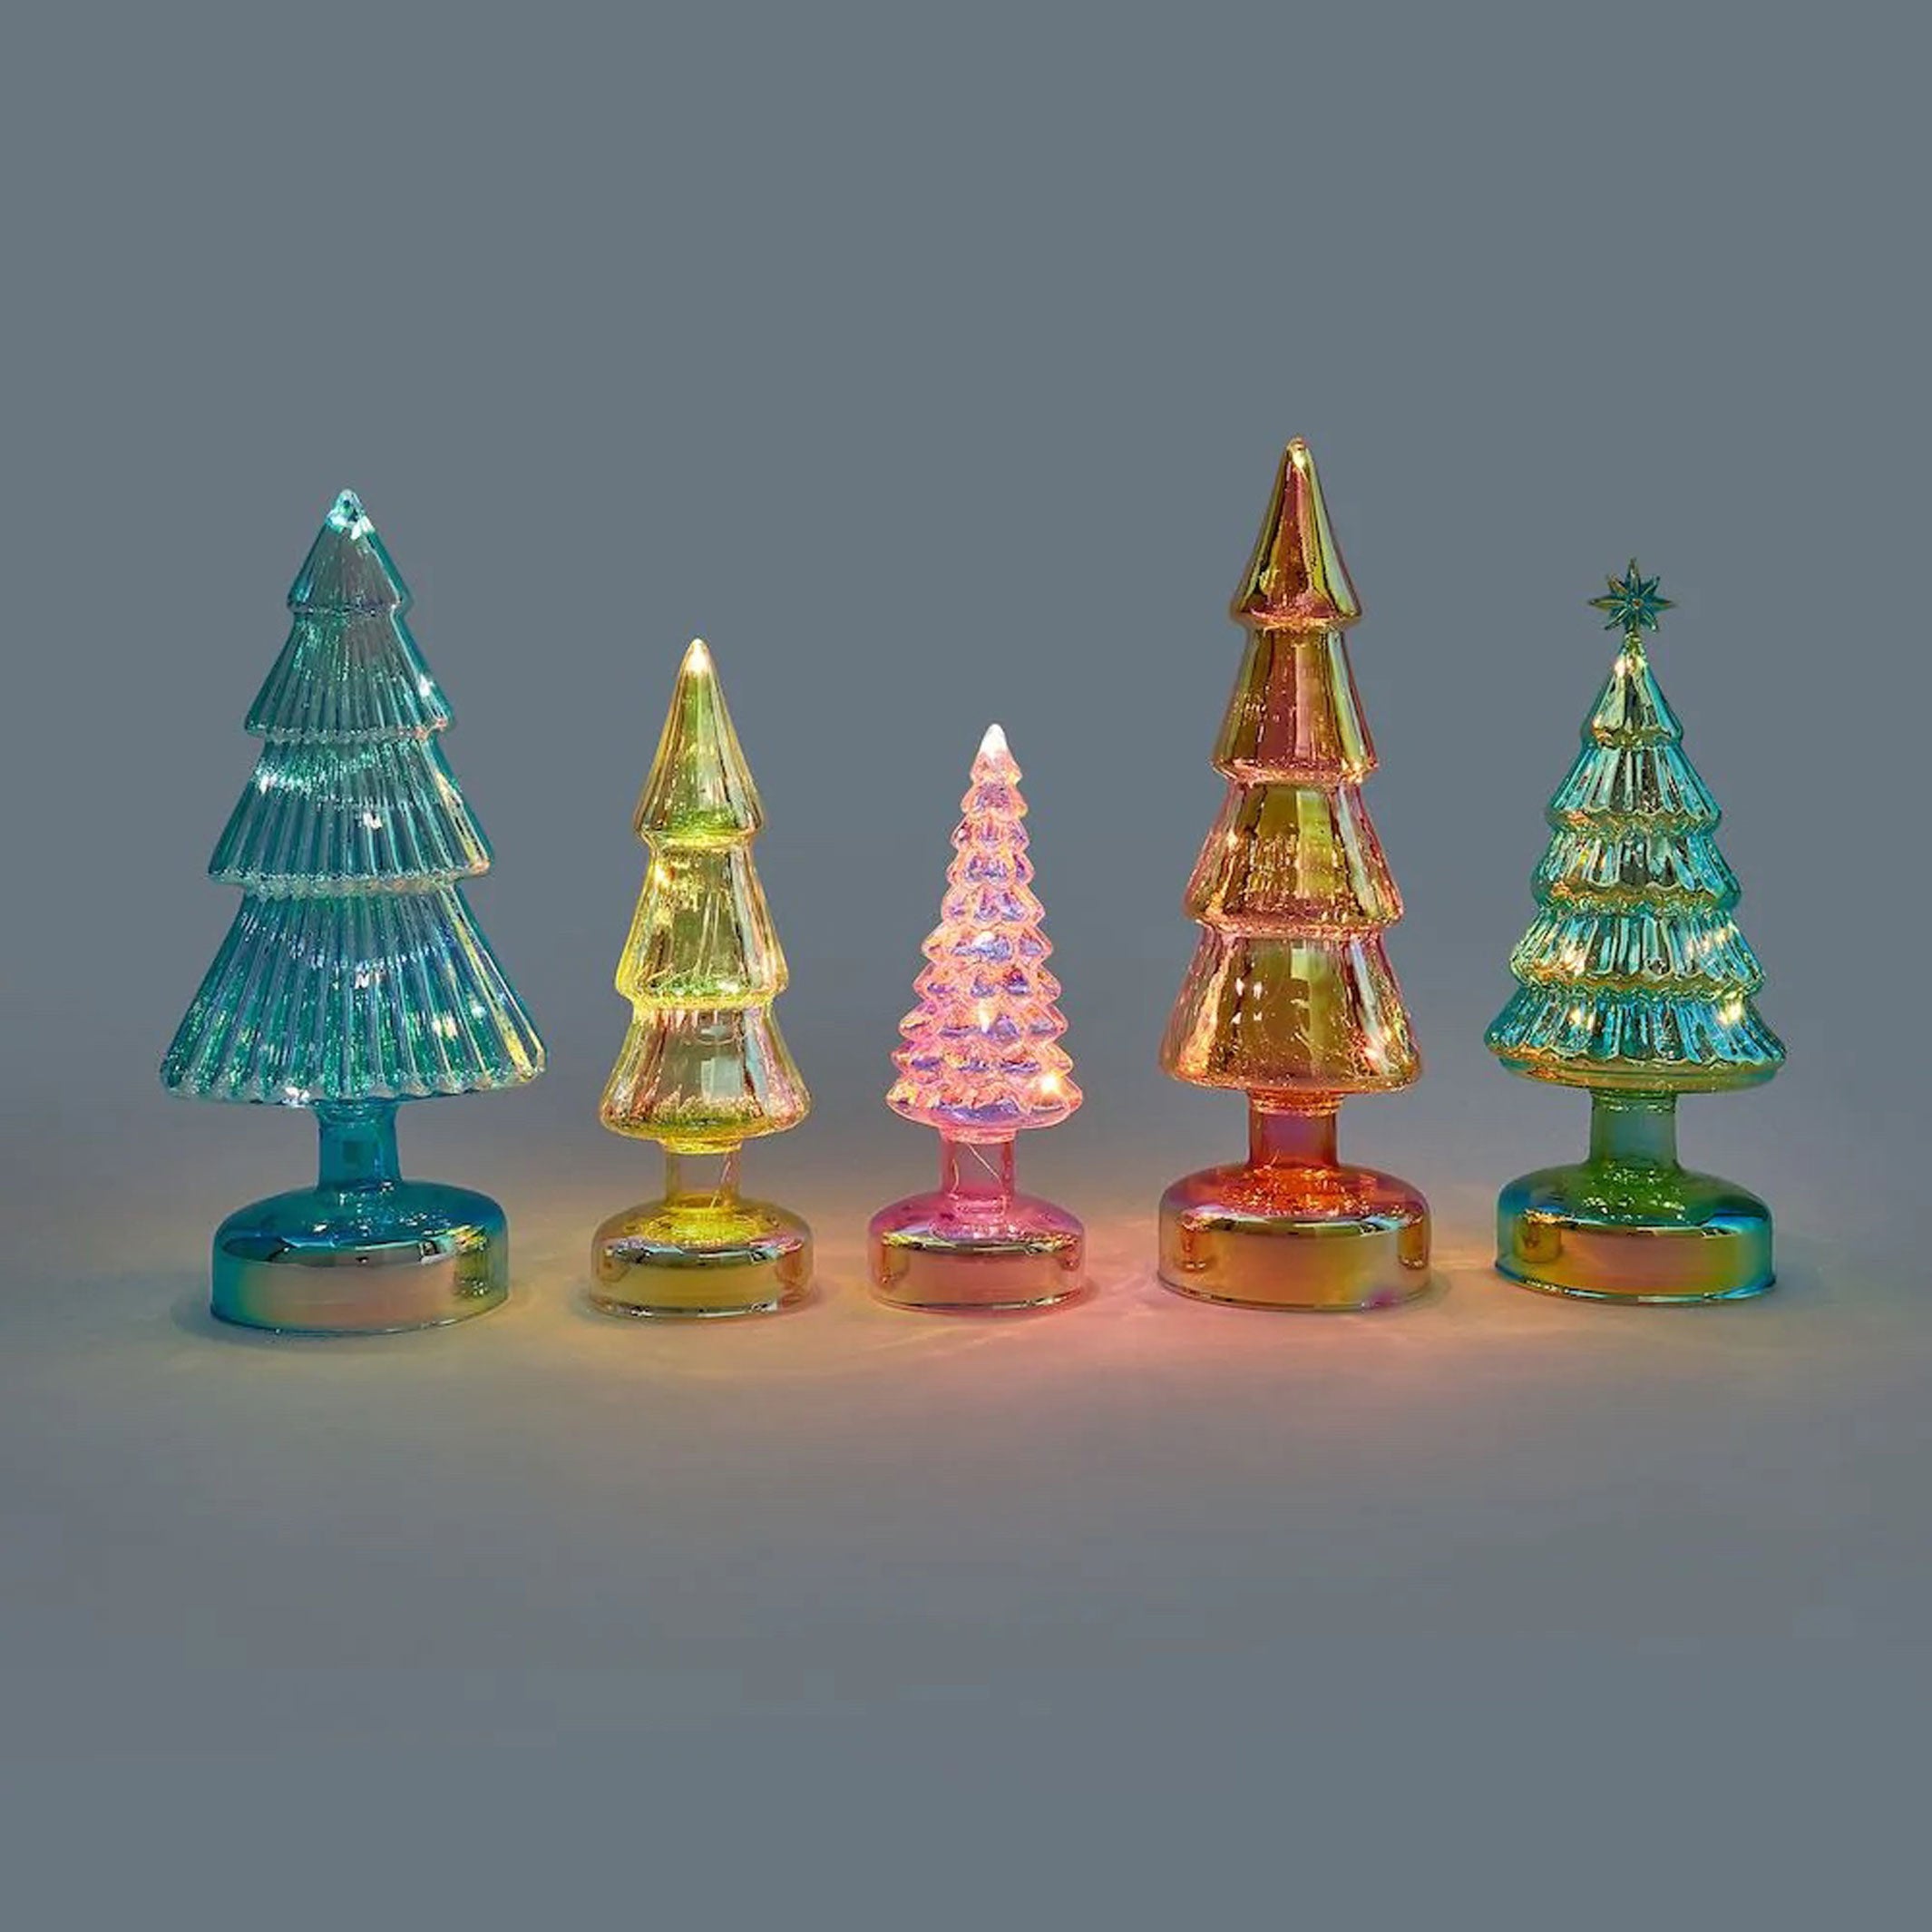 Small Colorful LED GLASS LIGHTED TREES | Glas-TANNENBÄUME mit LED Beleuchtung | 5er Set |  MoMA